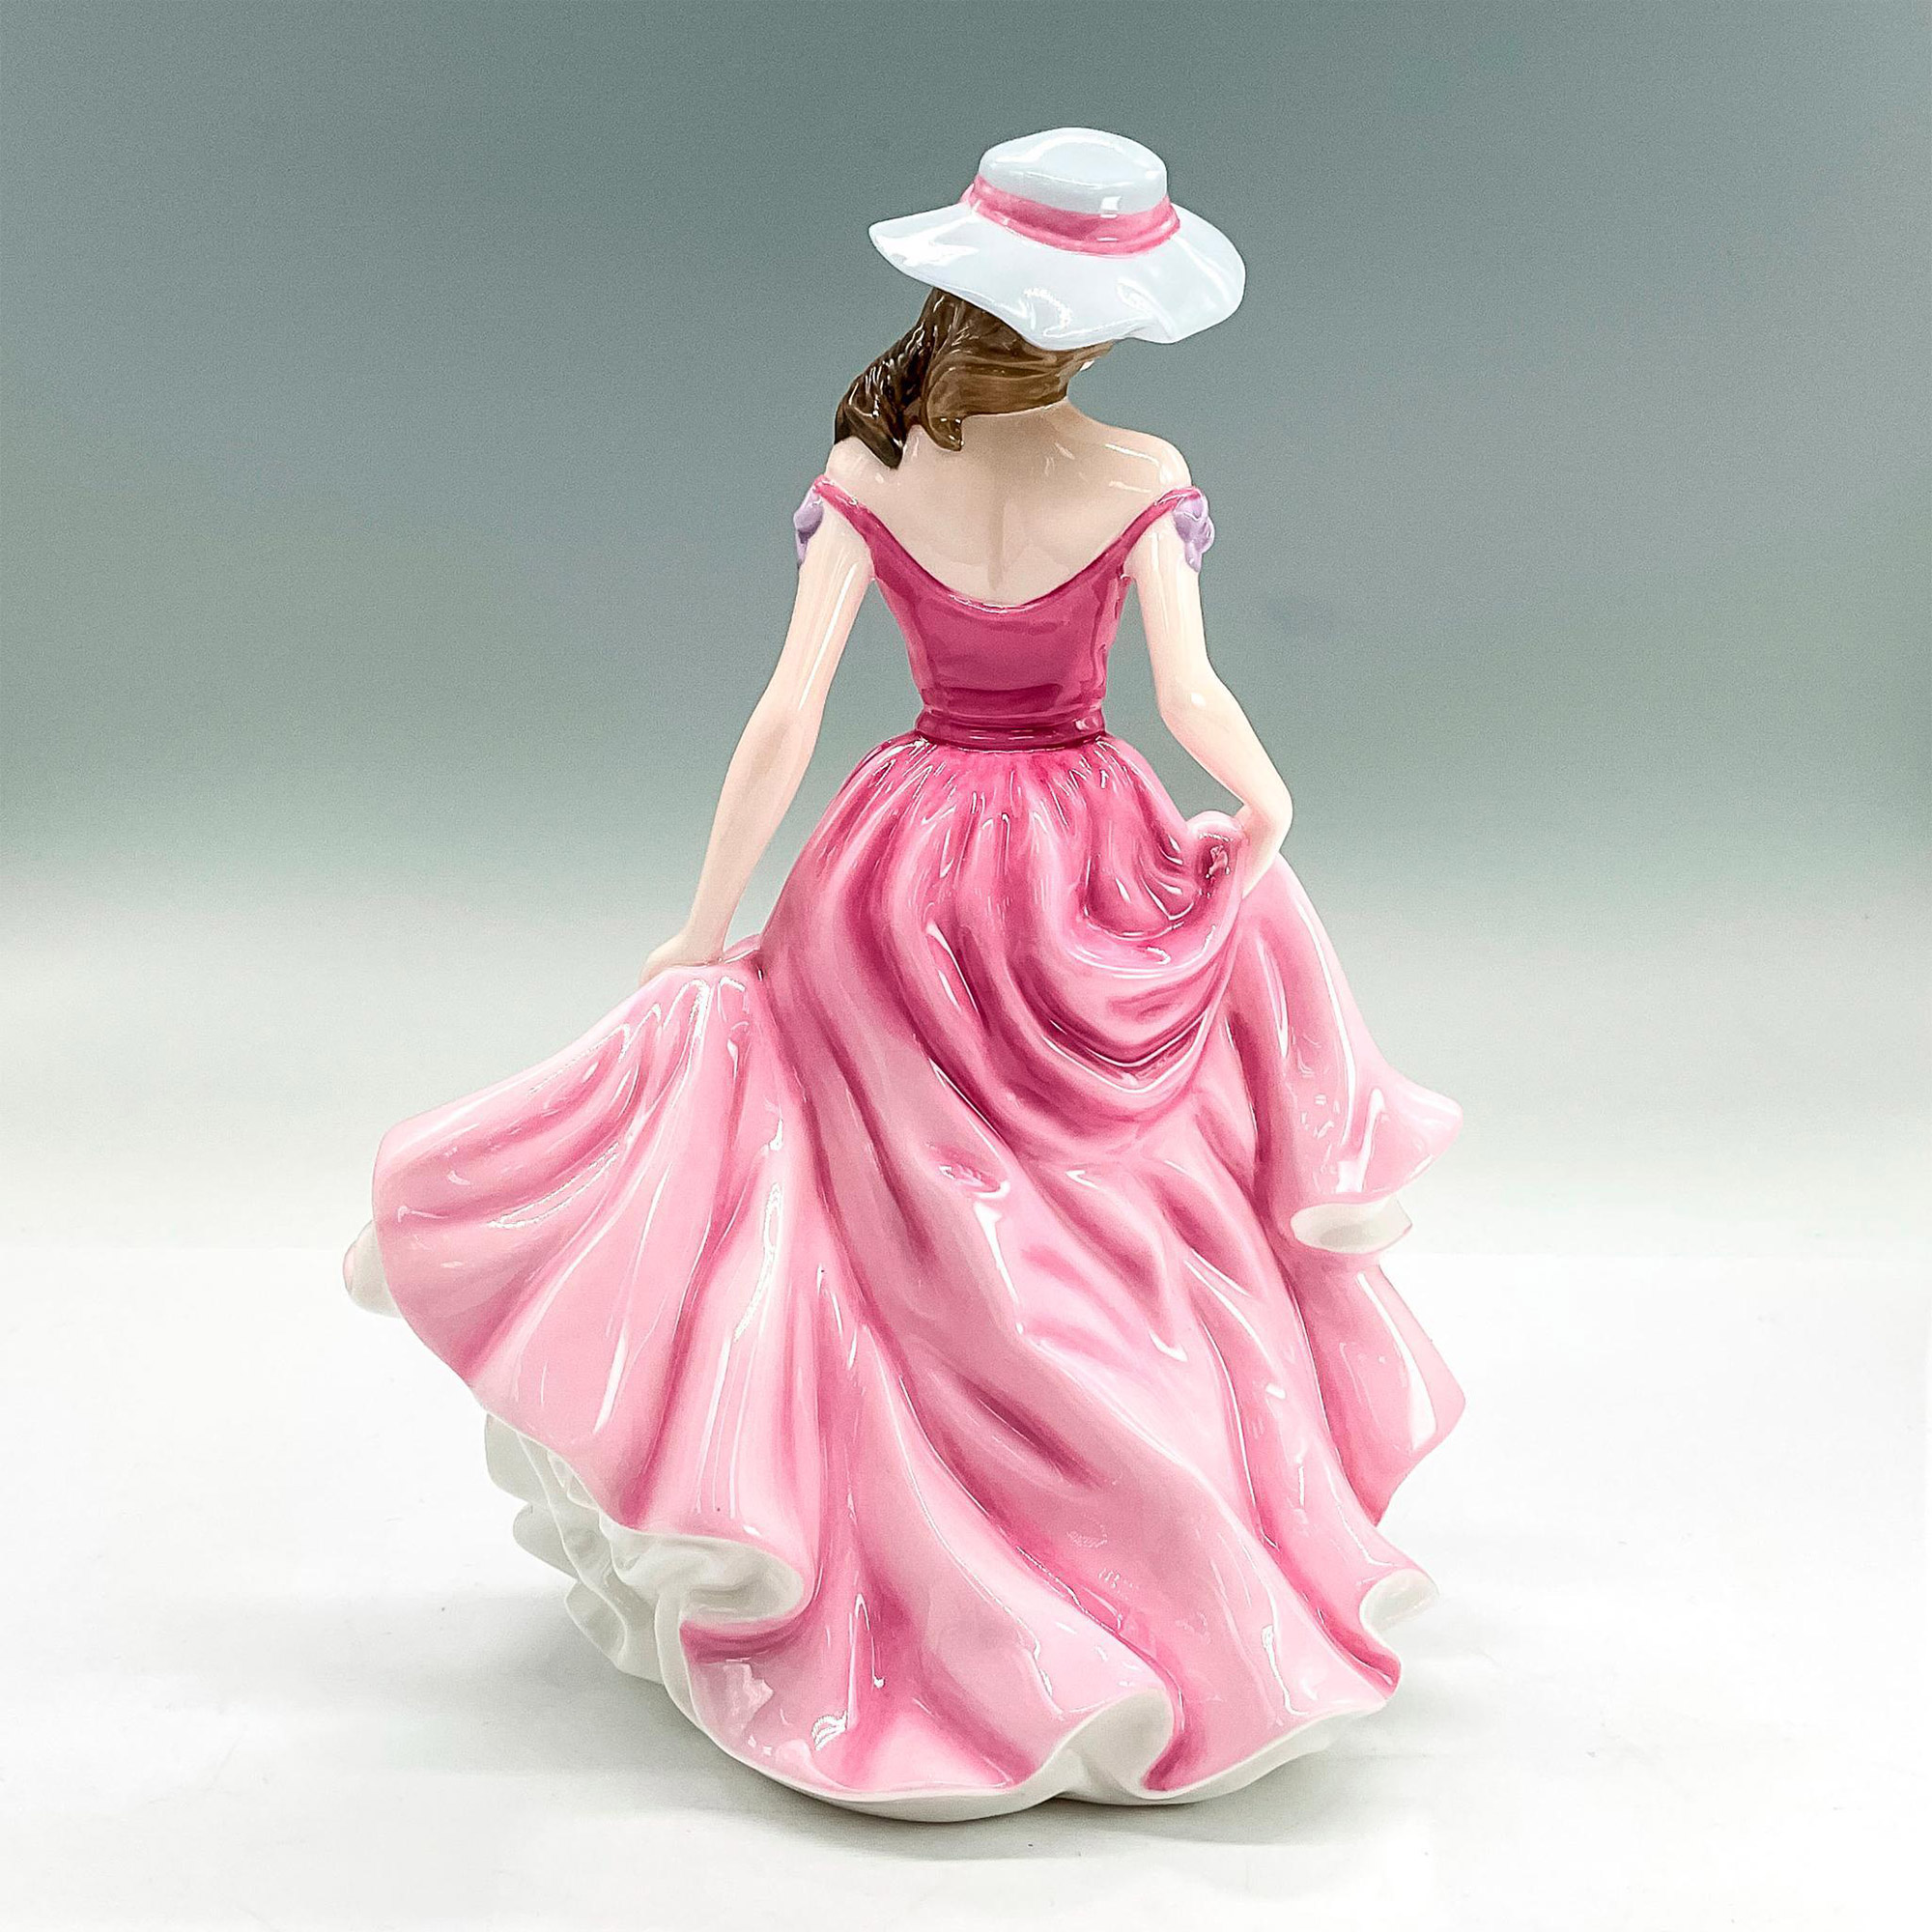 Especially For You - HN4746 - Royal Doulton Figurine - Image 2 of 3